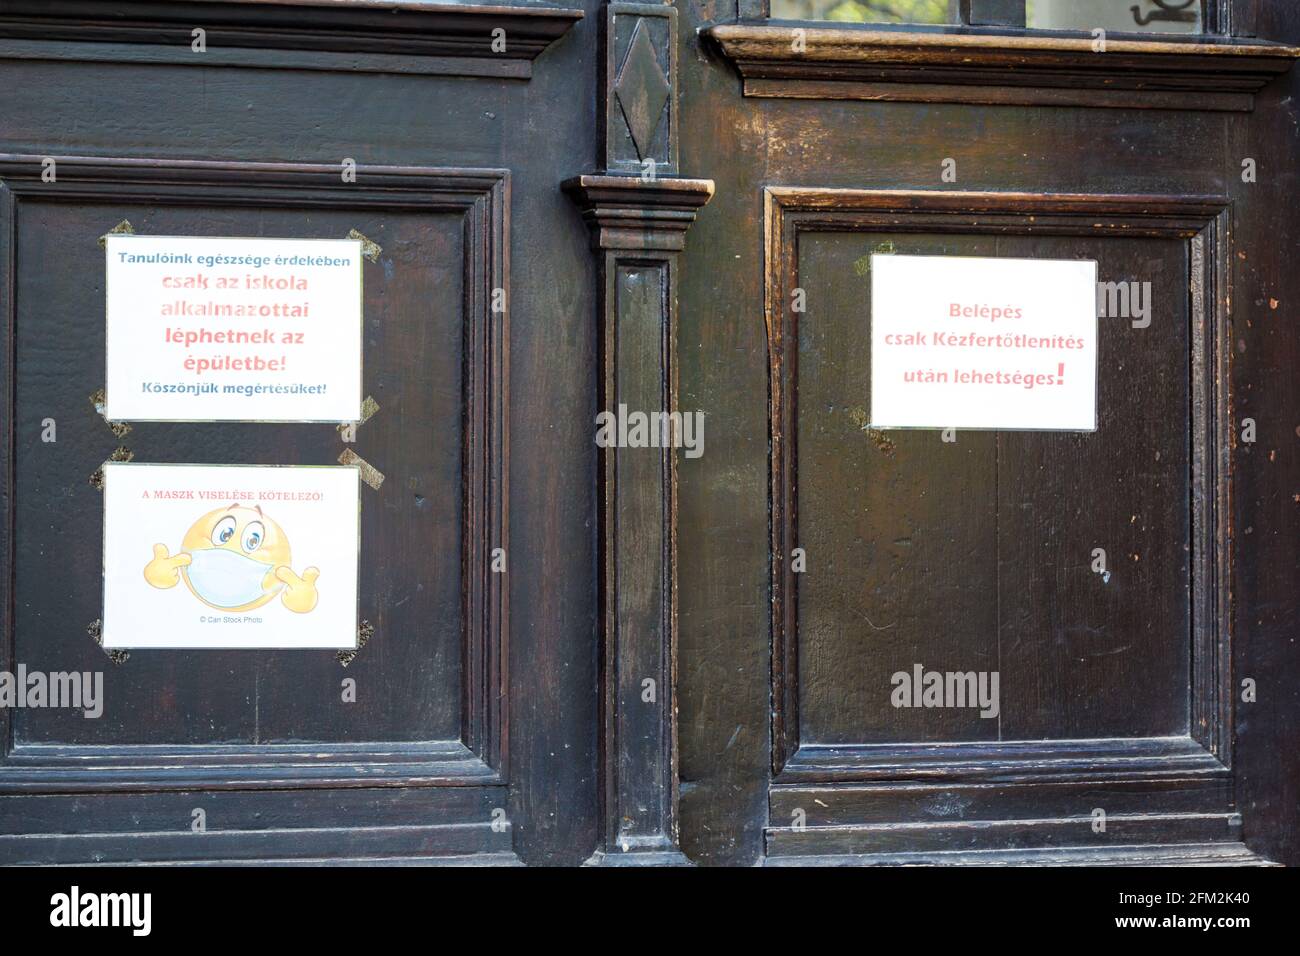 Warnings on school door: Wearing face mask is obligatory; Enter only after using hand sanitizer; Only school employees may enter; Sopron, Hungary Stock Photo